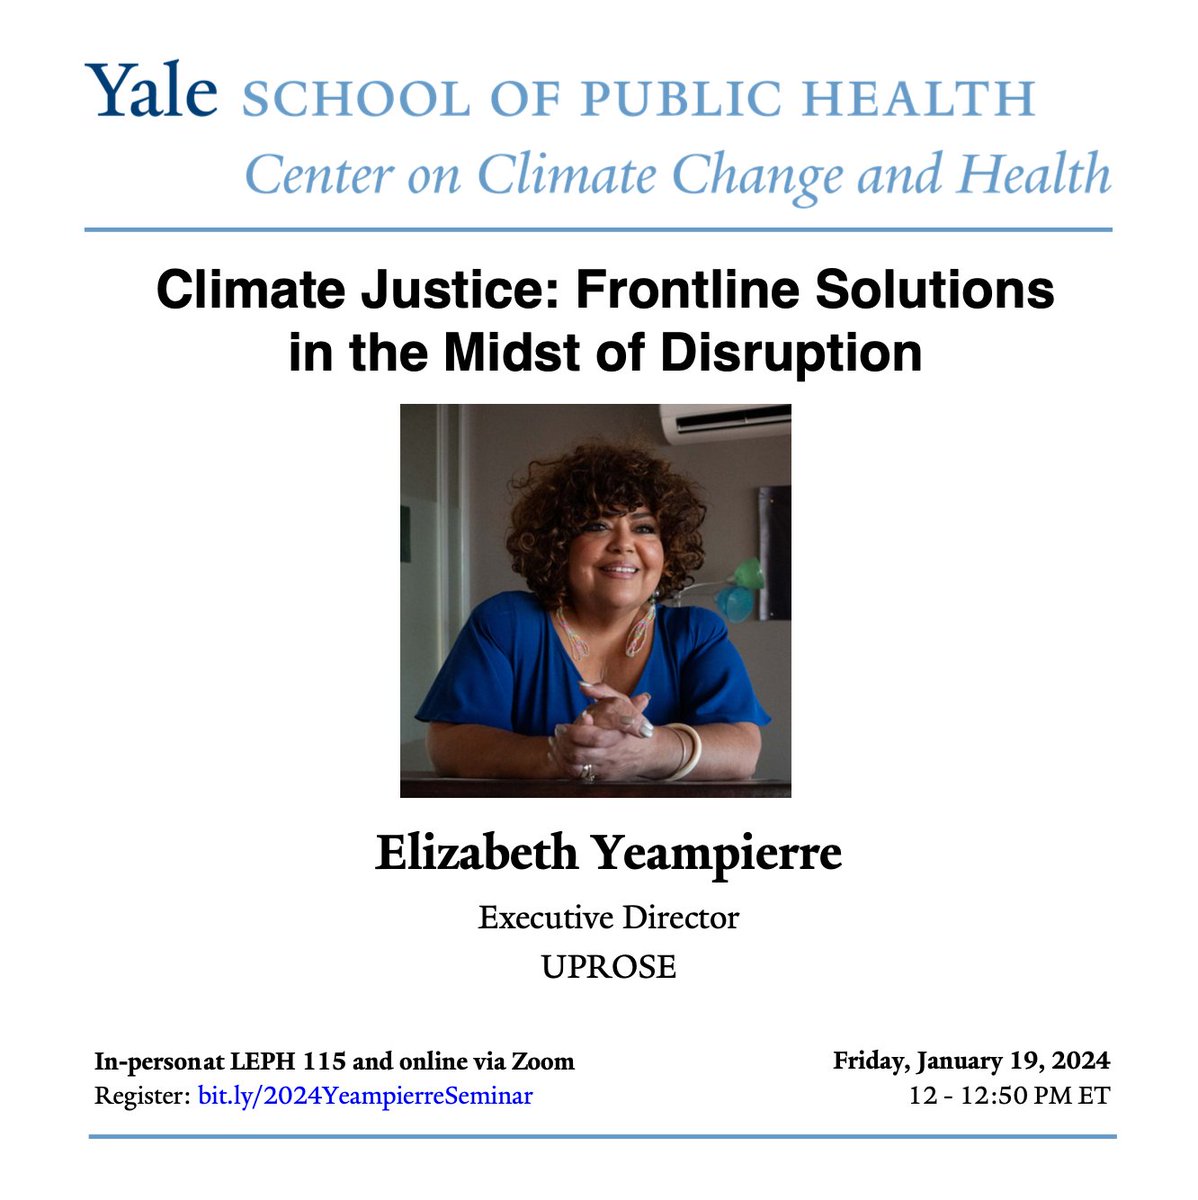 Join our #ClimateChangeandHealth Seminar on Friday, Jan. 19th from 12-1pm ET!  Our featured speaker, Elizabeth Yeampierre, will deliver the lecture “Climate Justice: Frontline Solutions in the Midst of Disruption.'  

Register here👉 bit.ly/2024Yeampierre…

@yeampierre @UPROSE